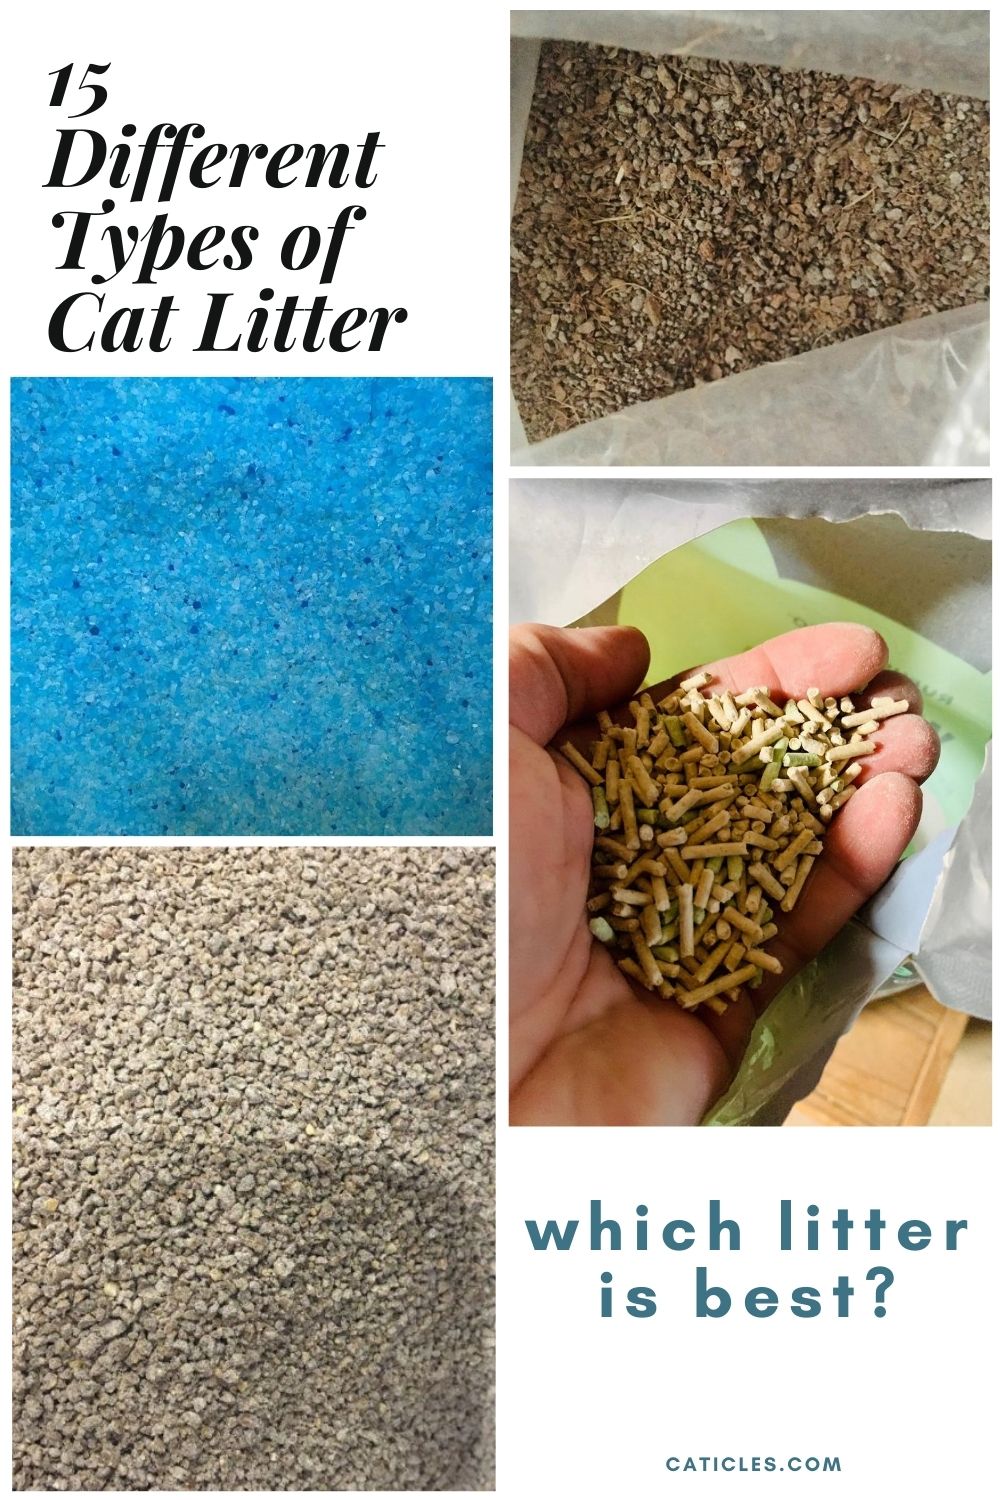 CAT LITTER MAY BE DEADLY